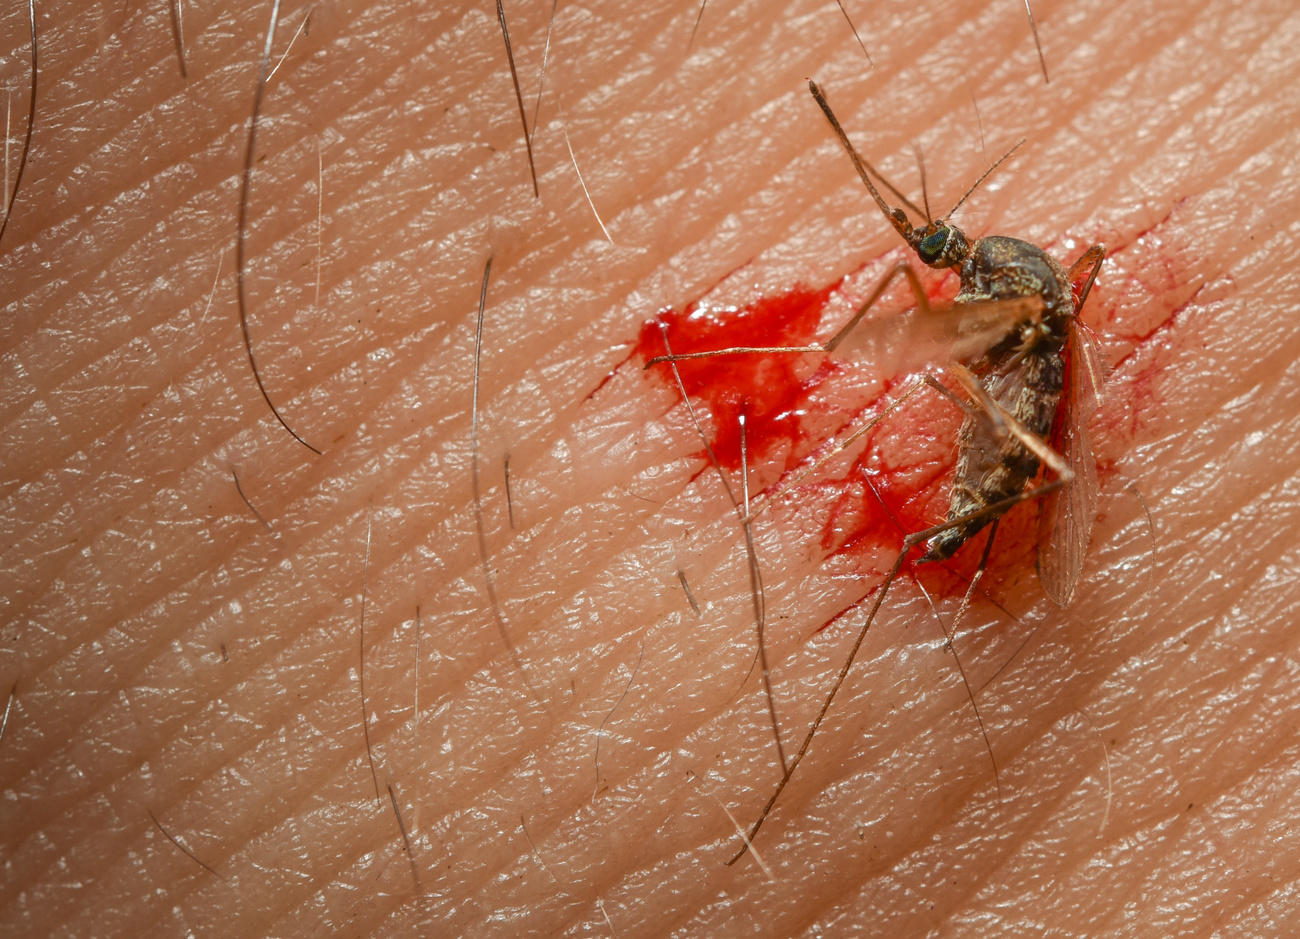 dead mosquito on bloody skin